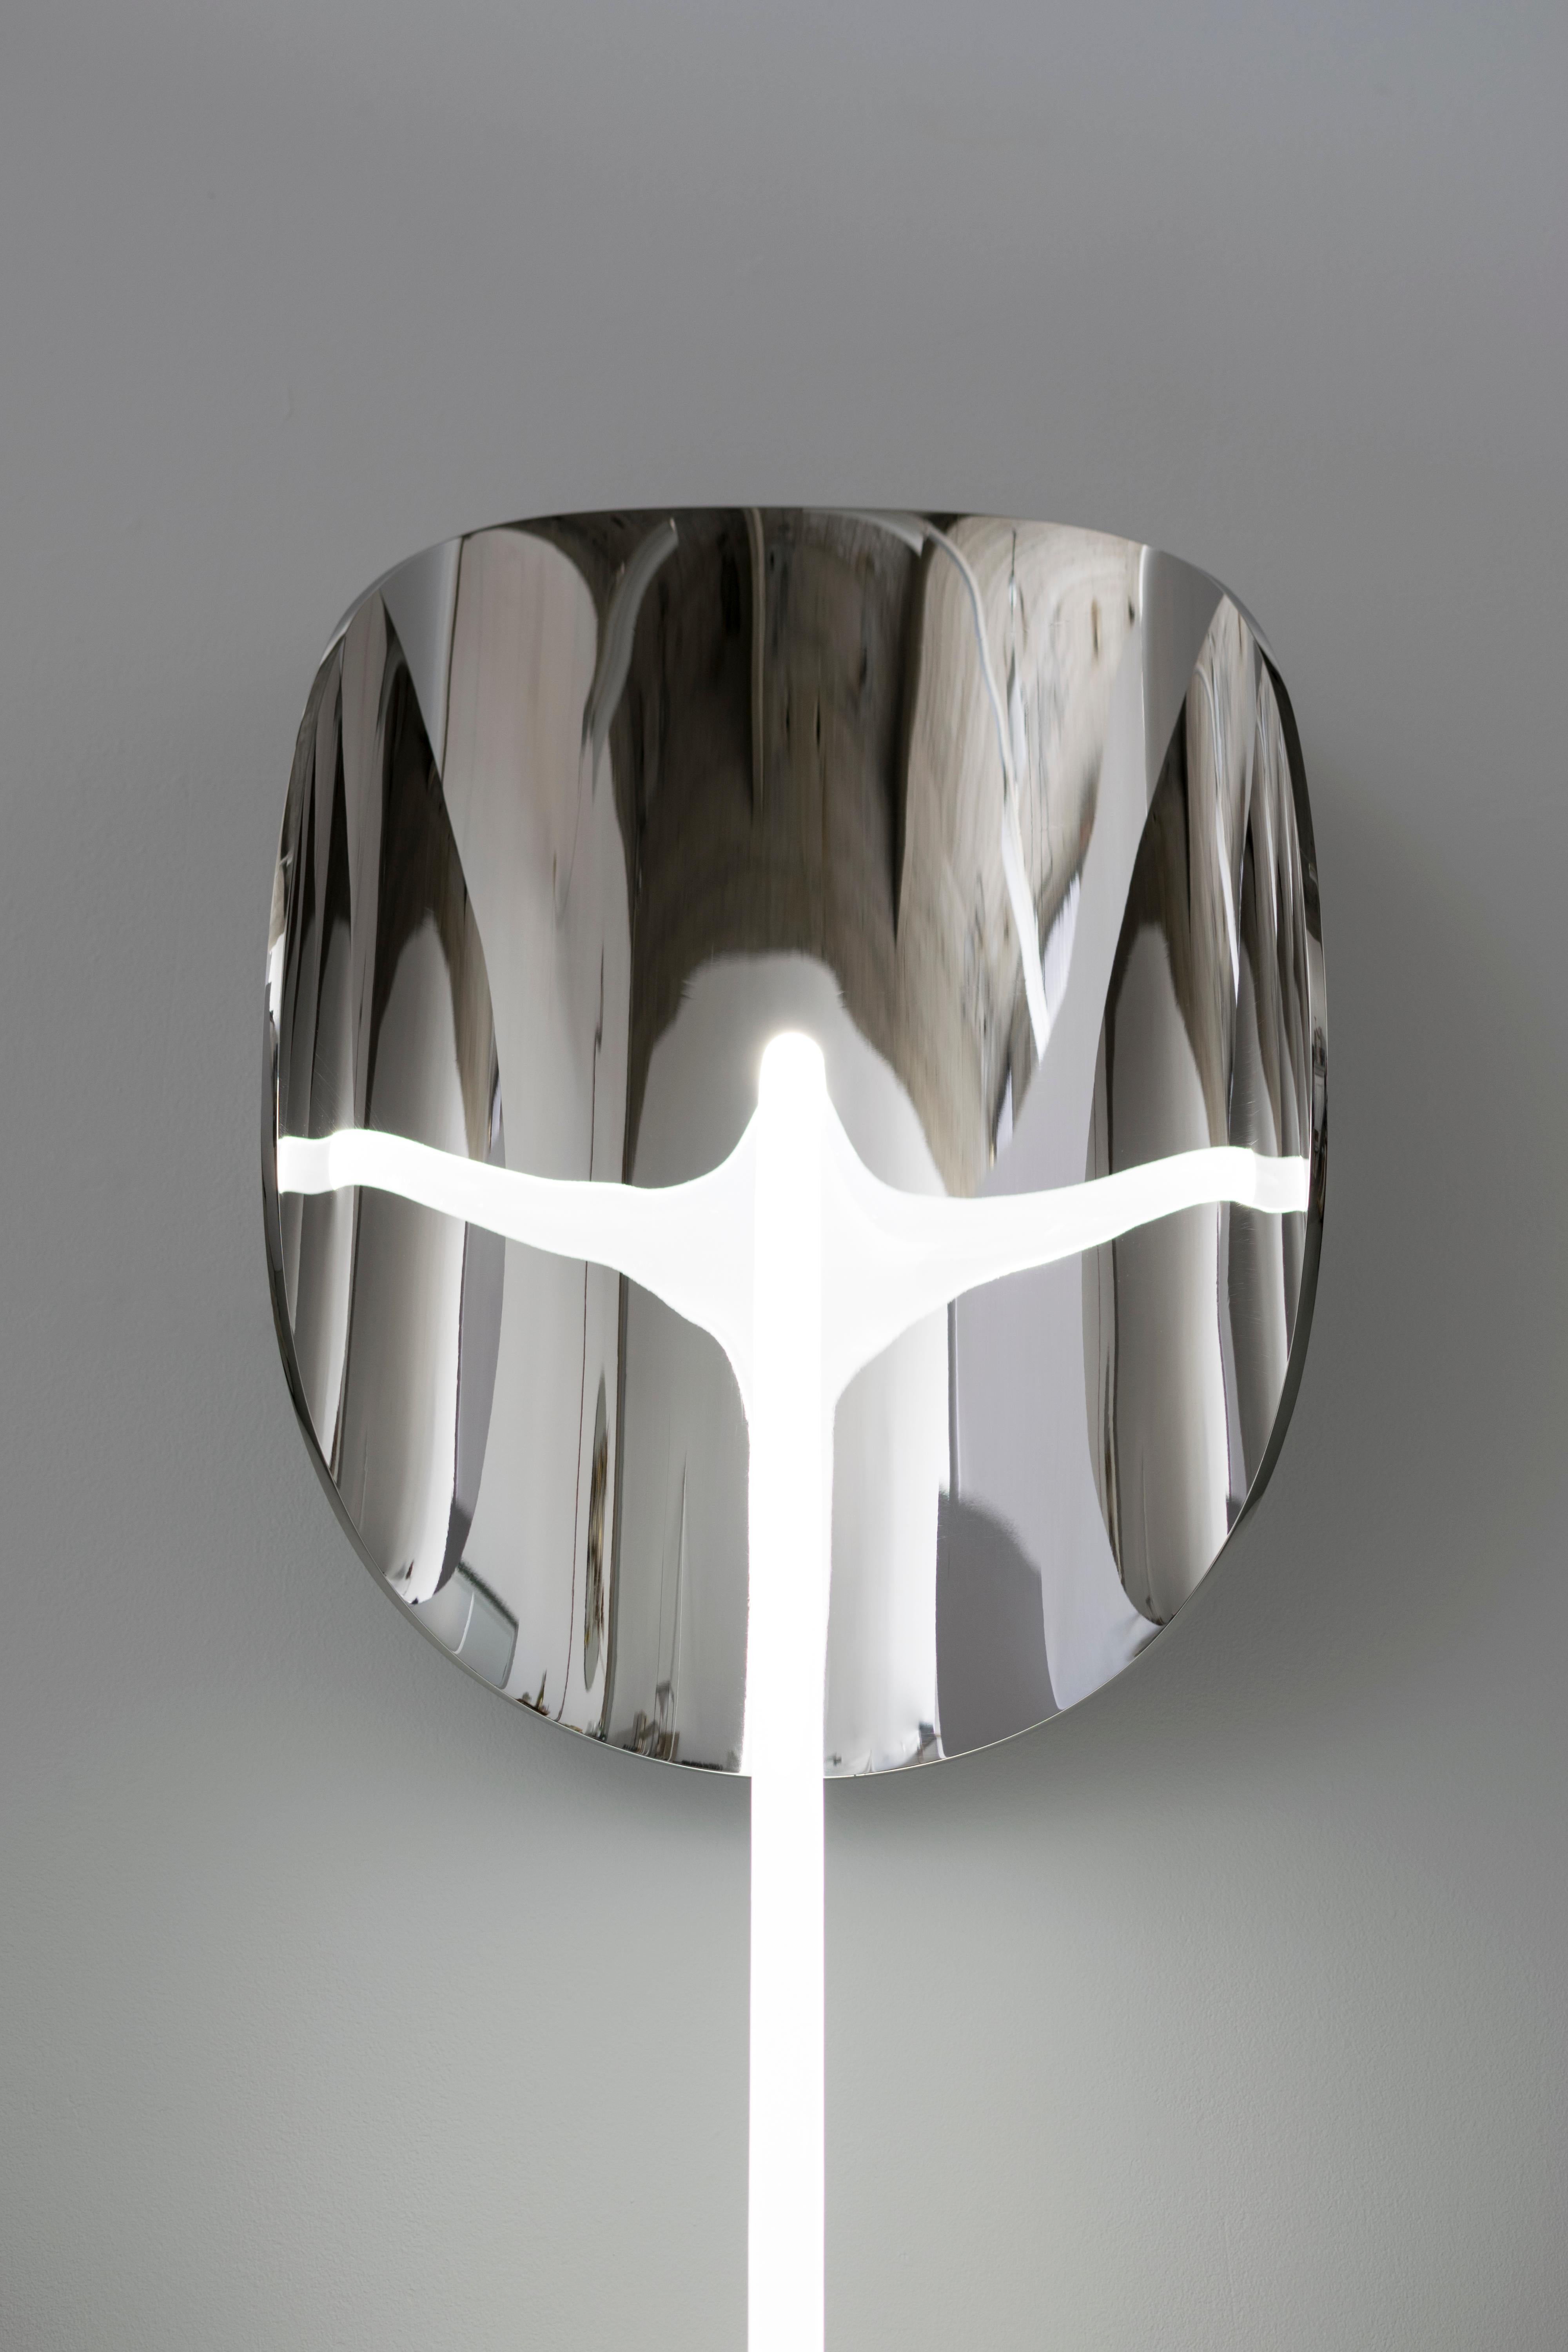 Stainless Steel The elusive nature of perception No. 07 Mirror by Maximilian Michaelis